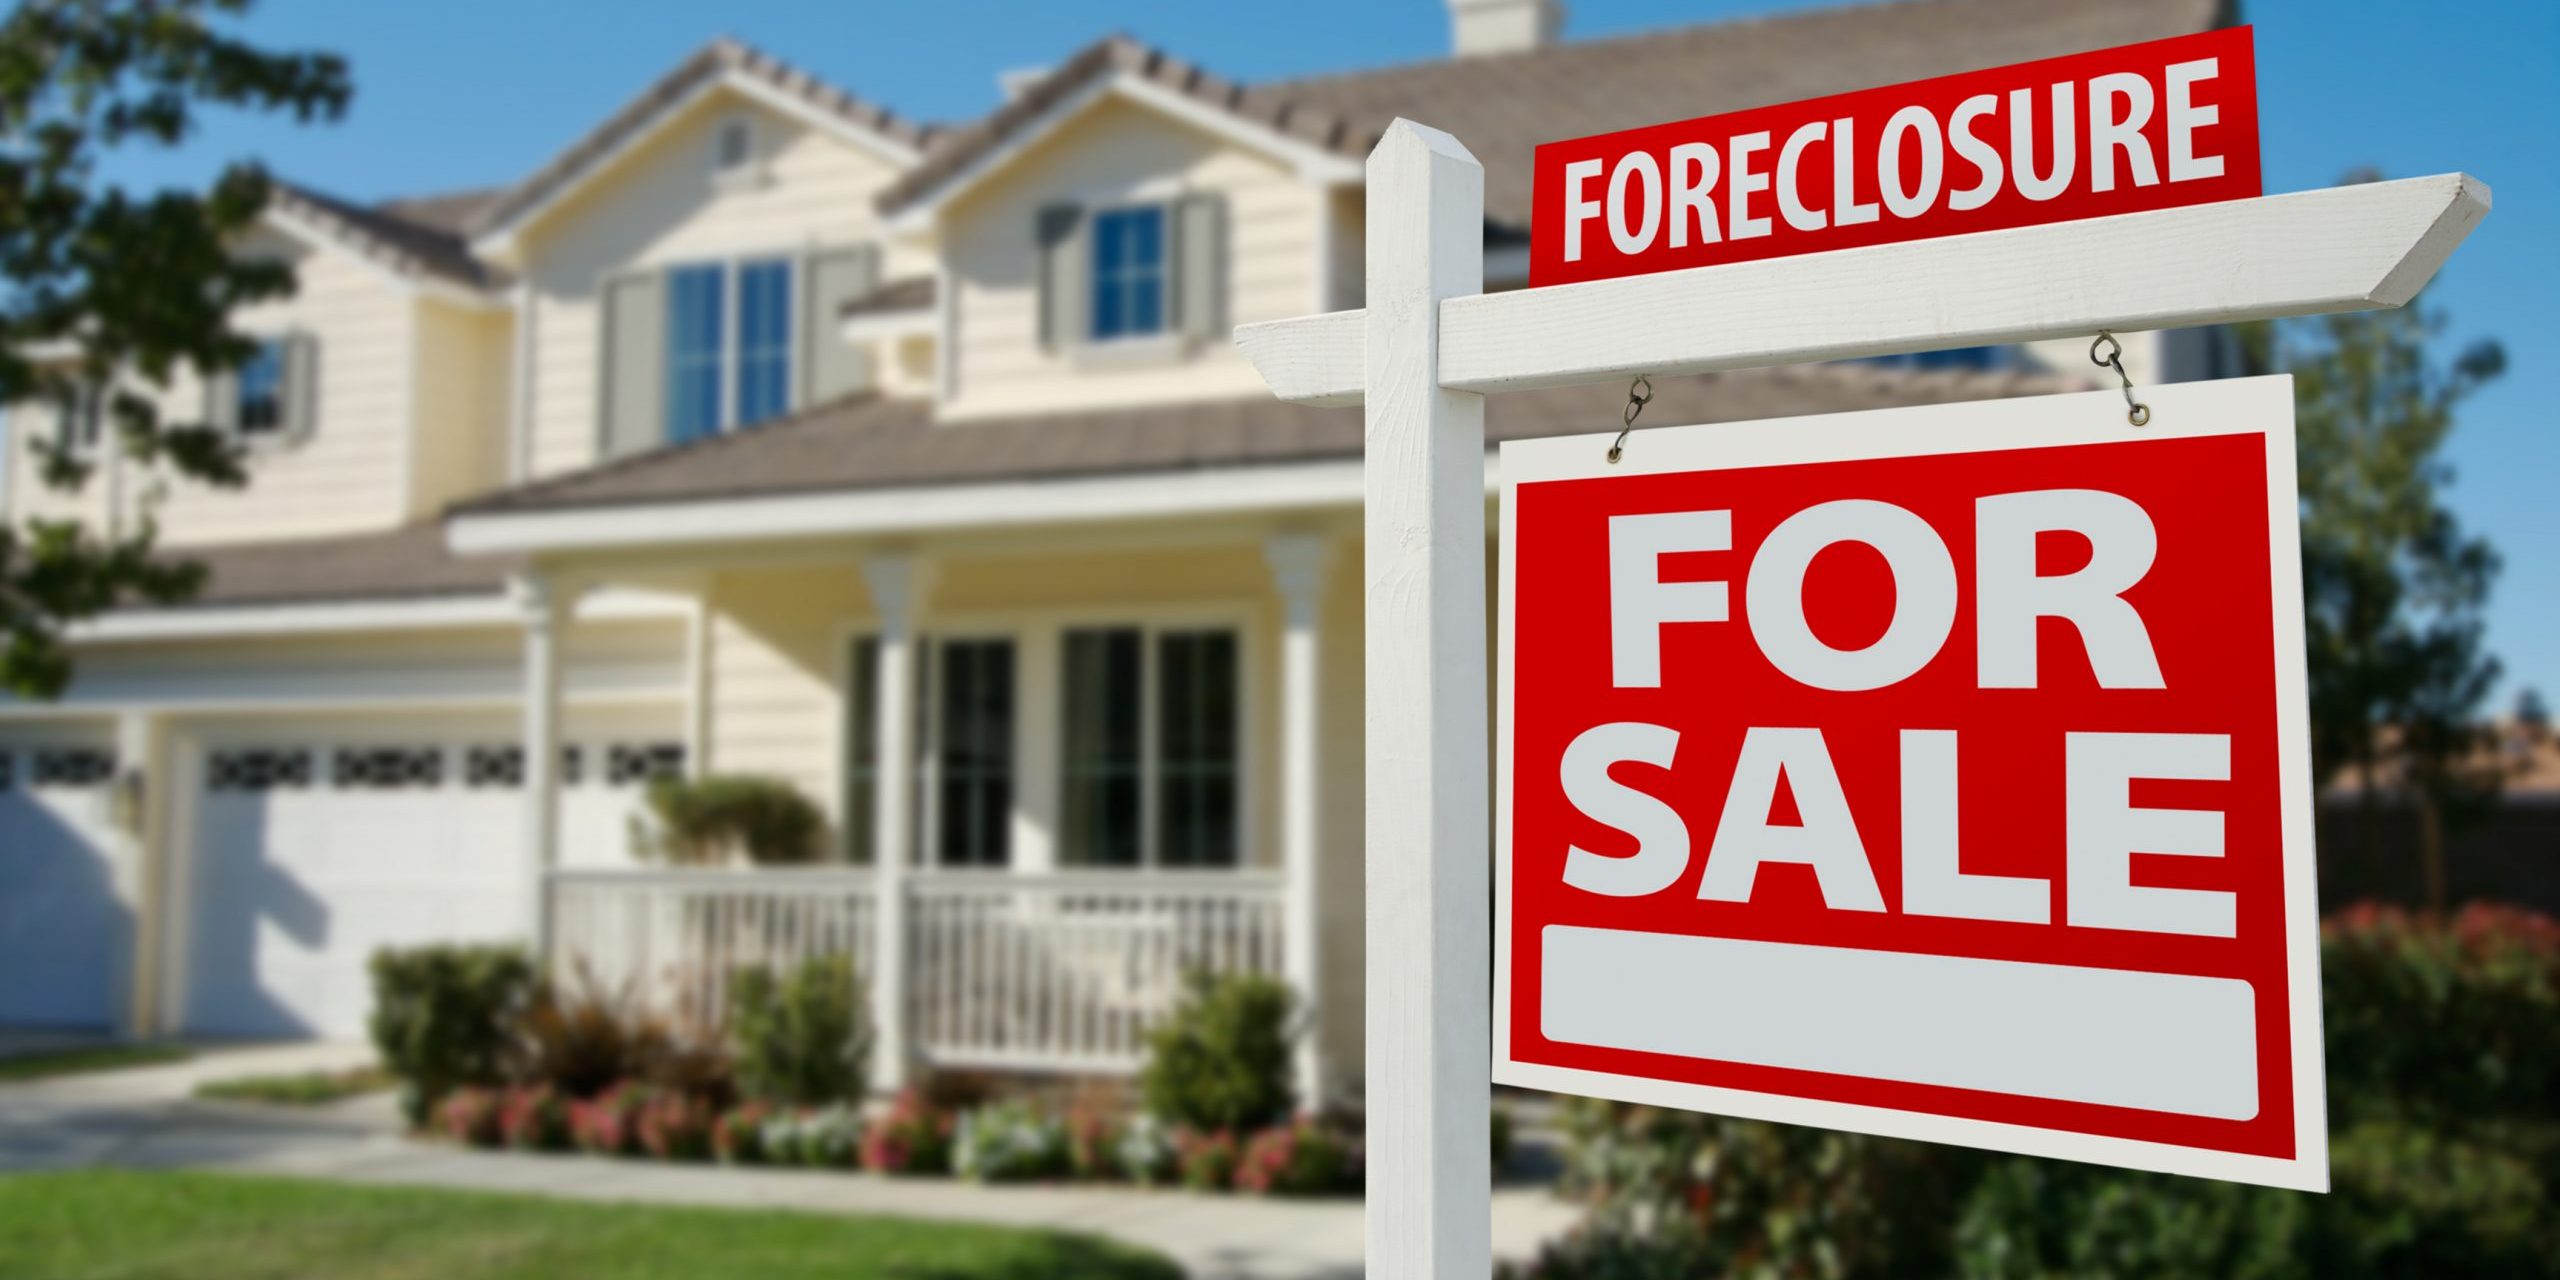 Florida foreclosure investing forex market open on saturday and sunday